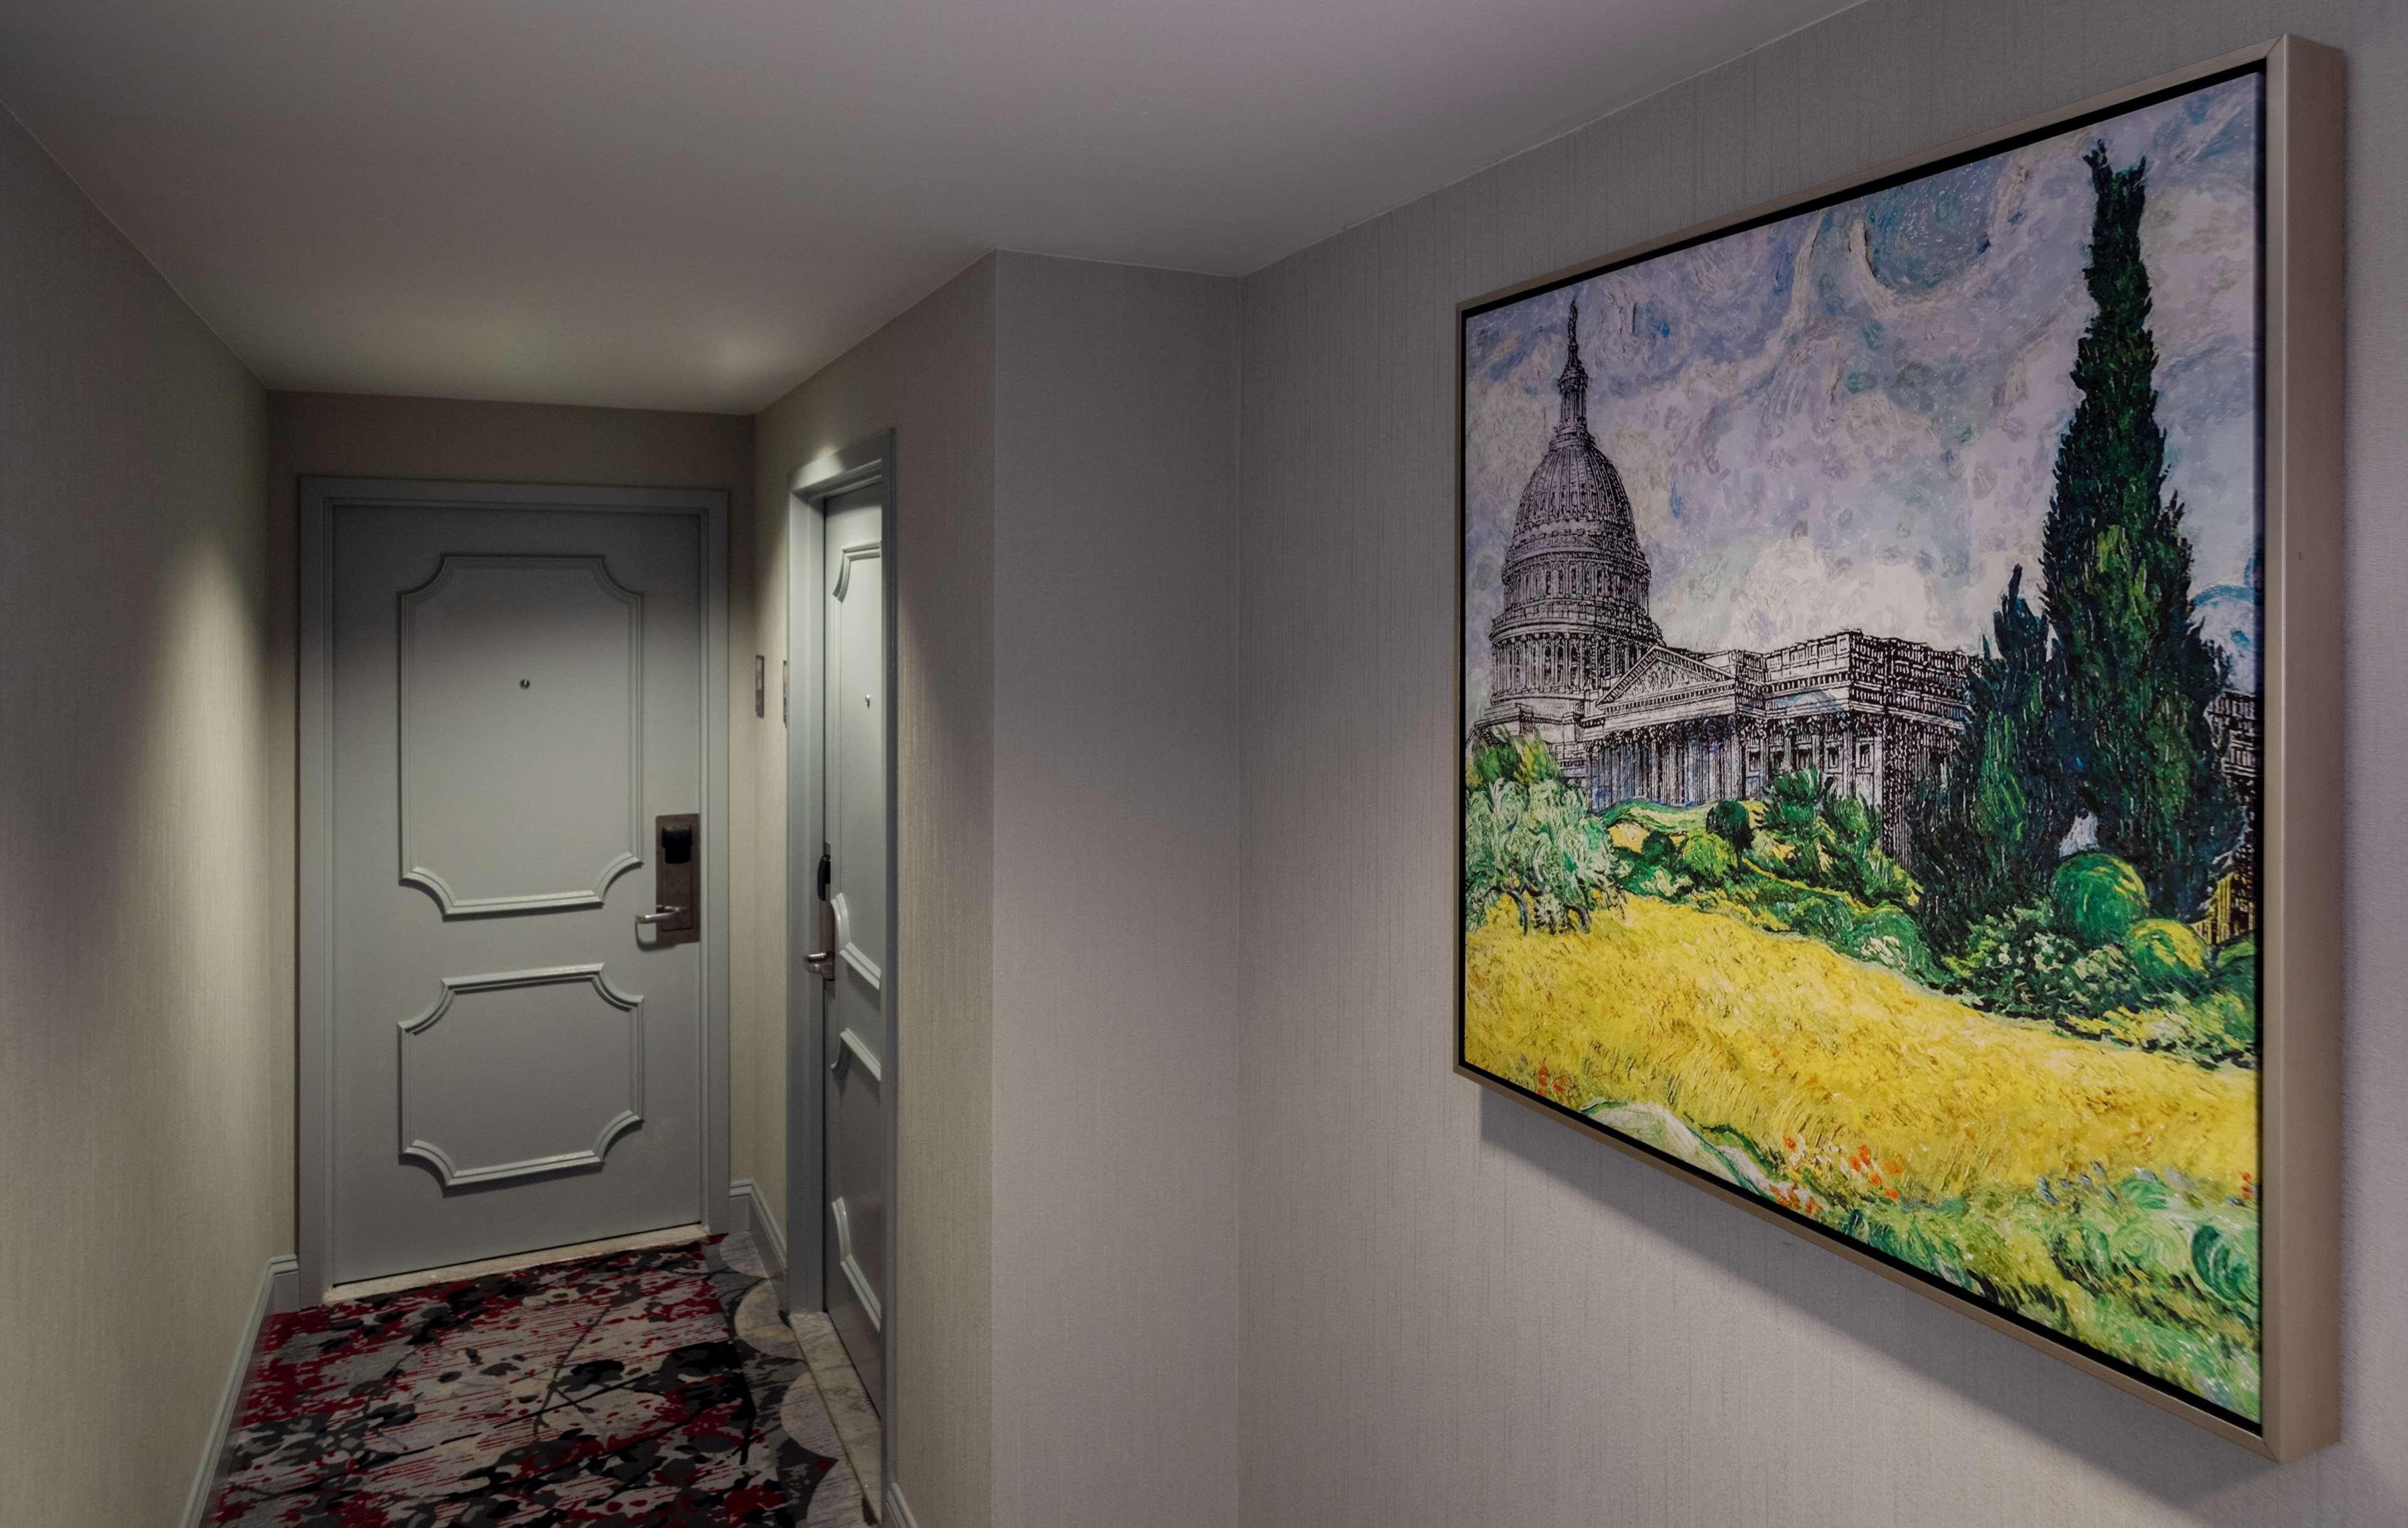 West End Washington Dc, Tapestry Collection By Hilton Hotel Exterior photo